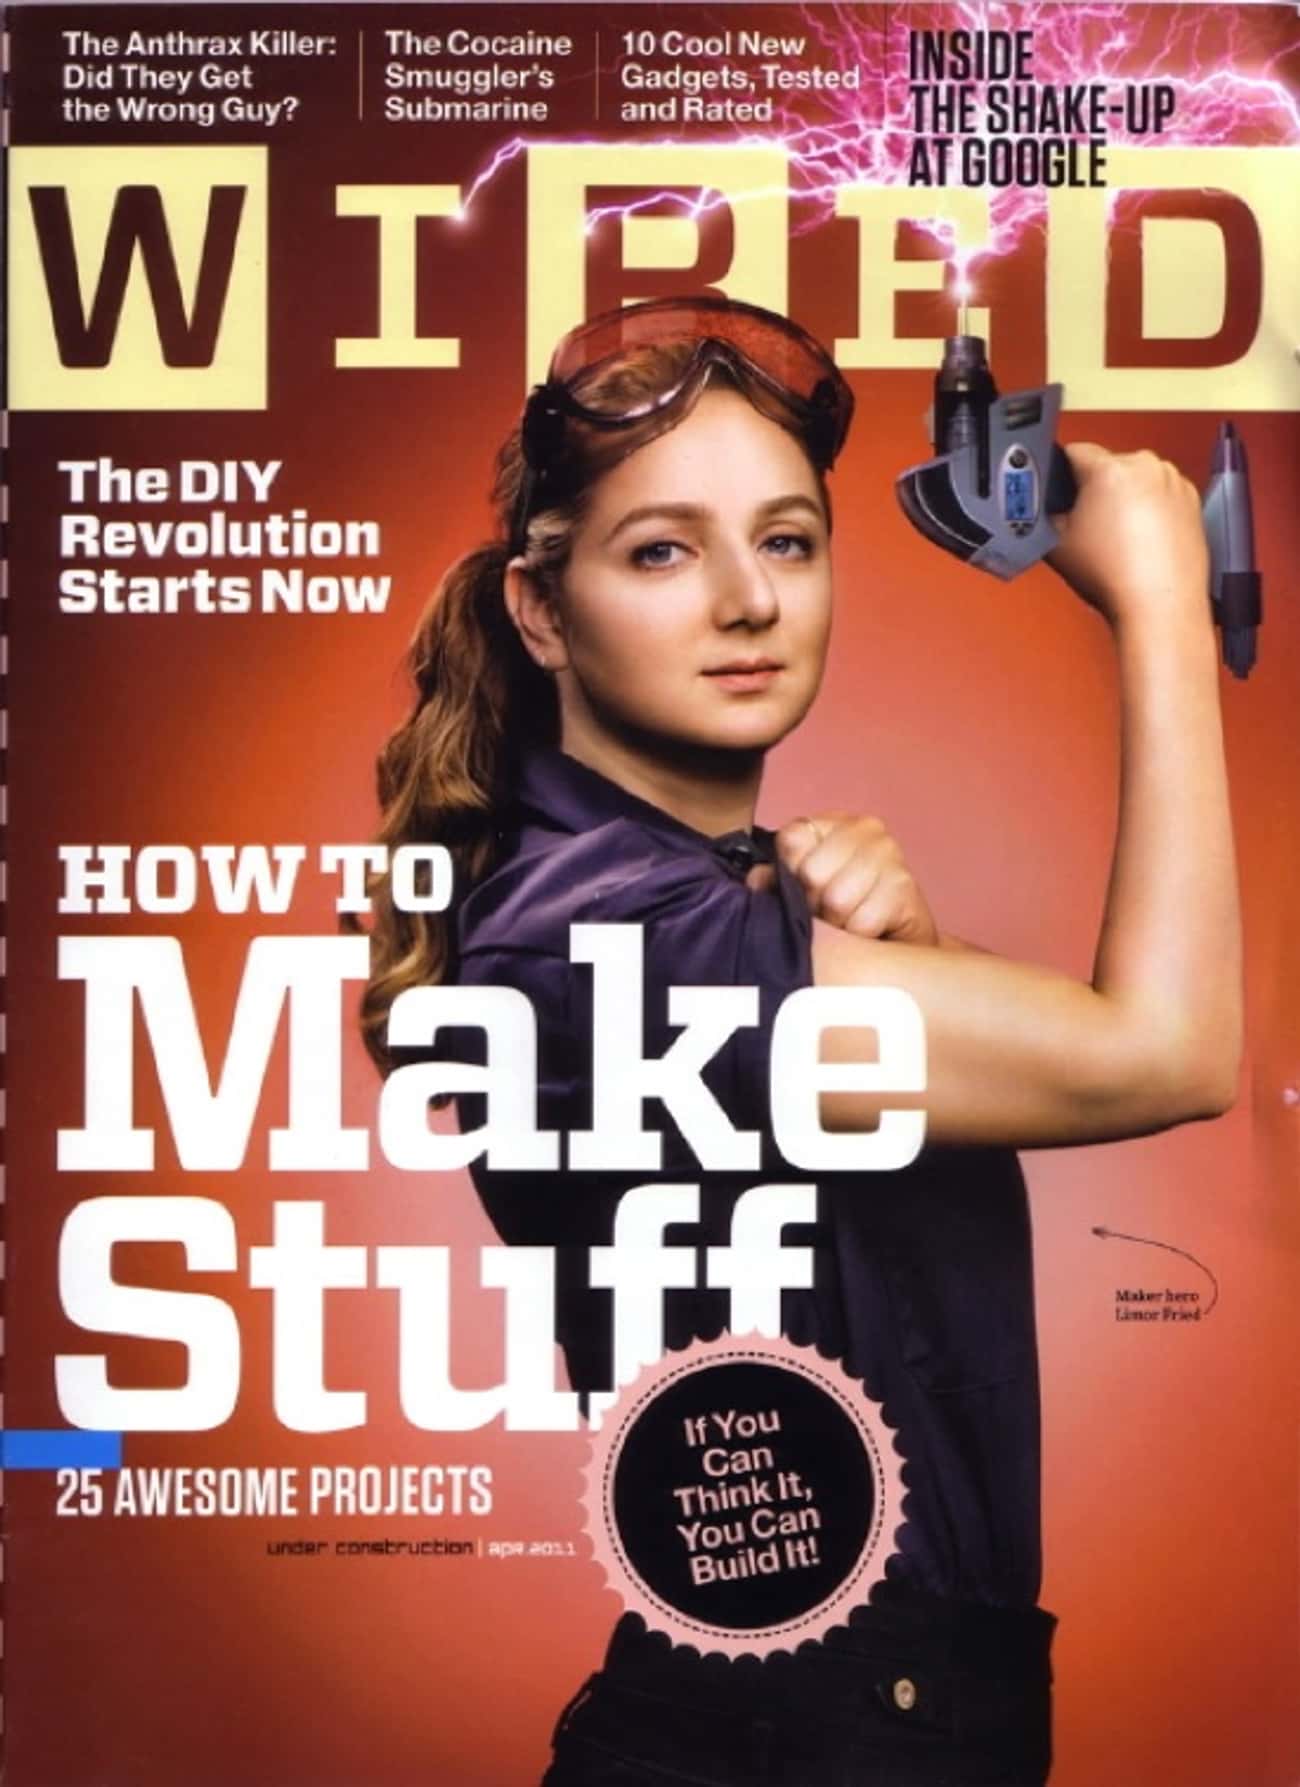 Wired - January 2011